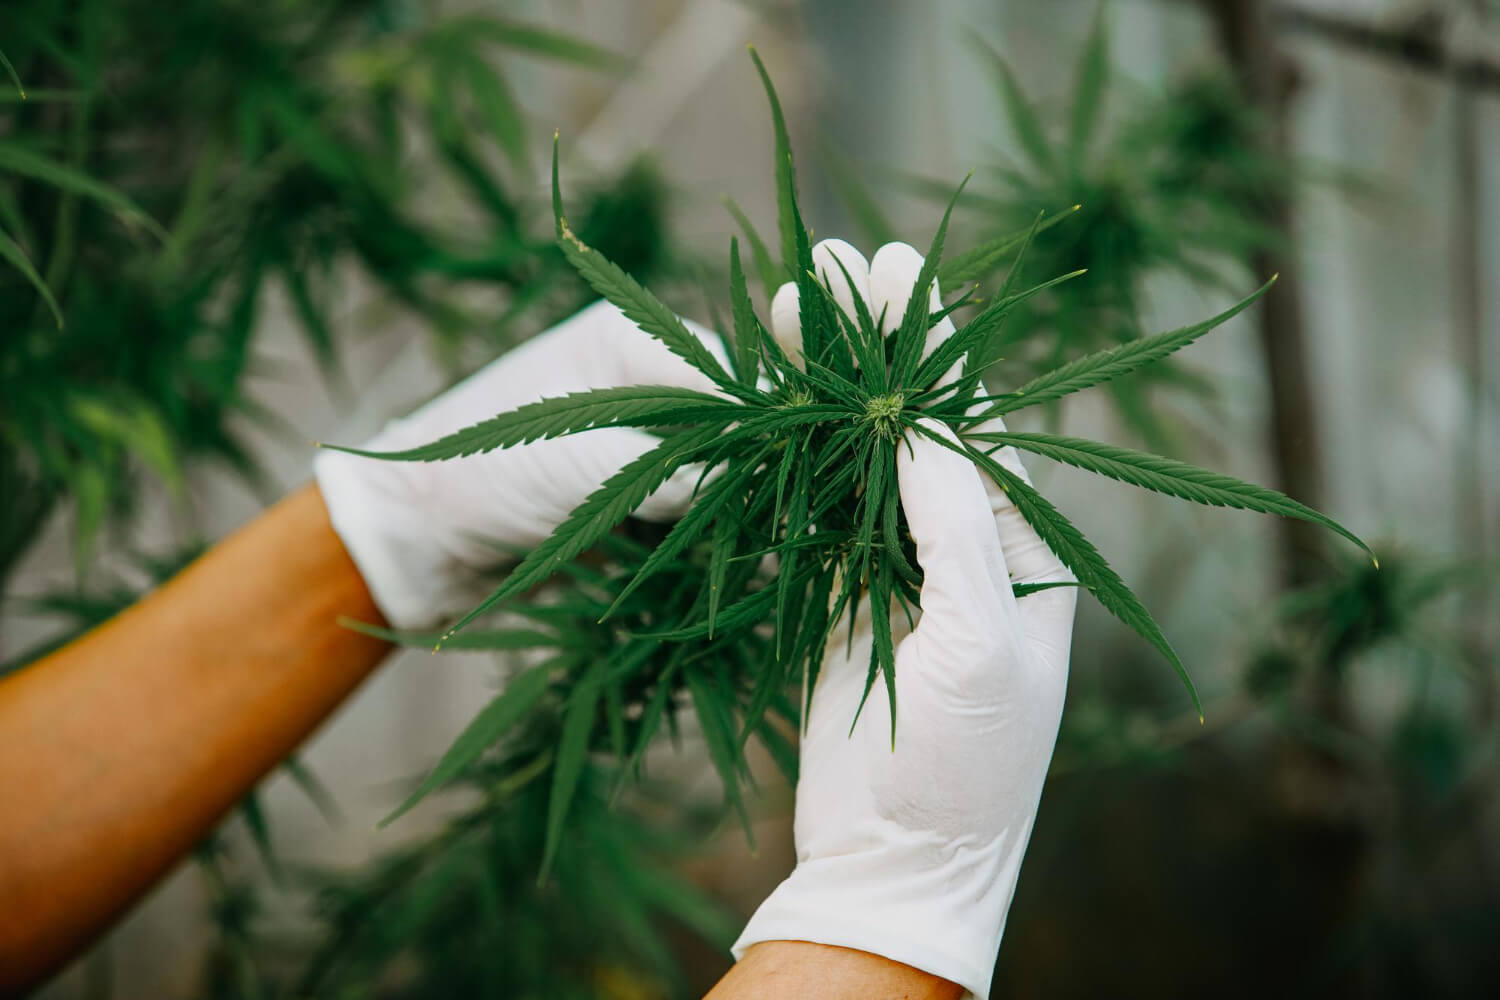 Hands holding a cannabis plant